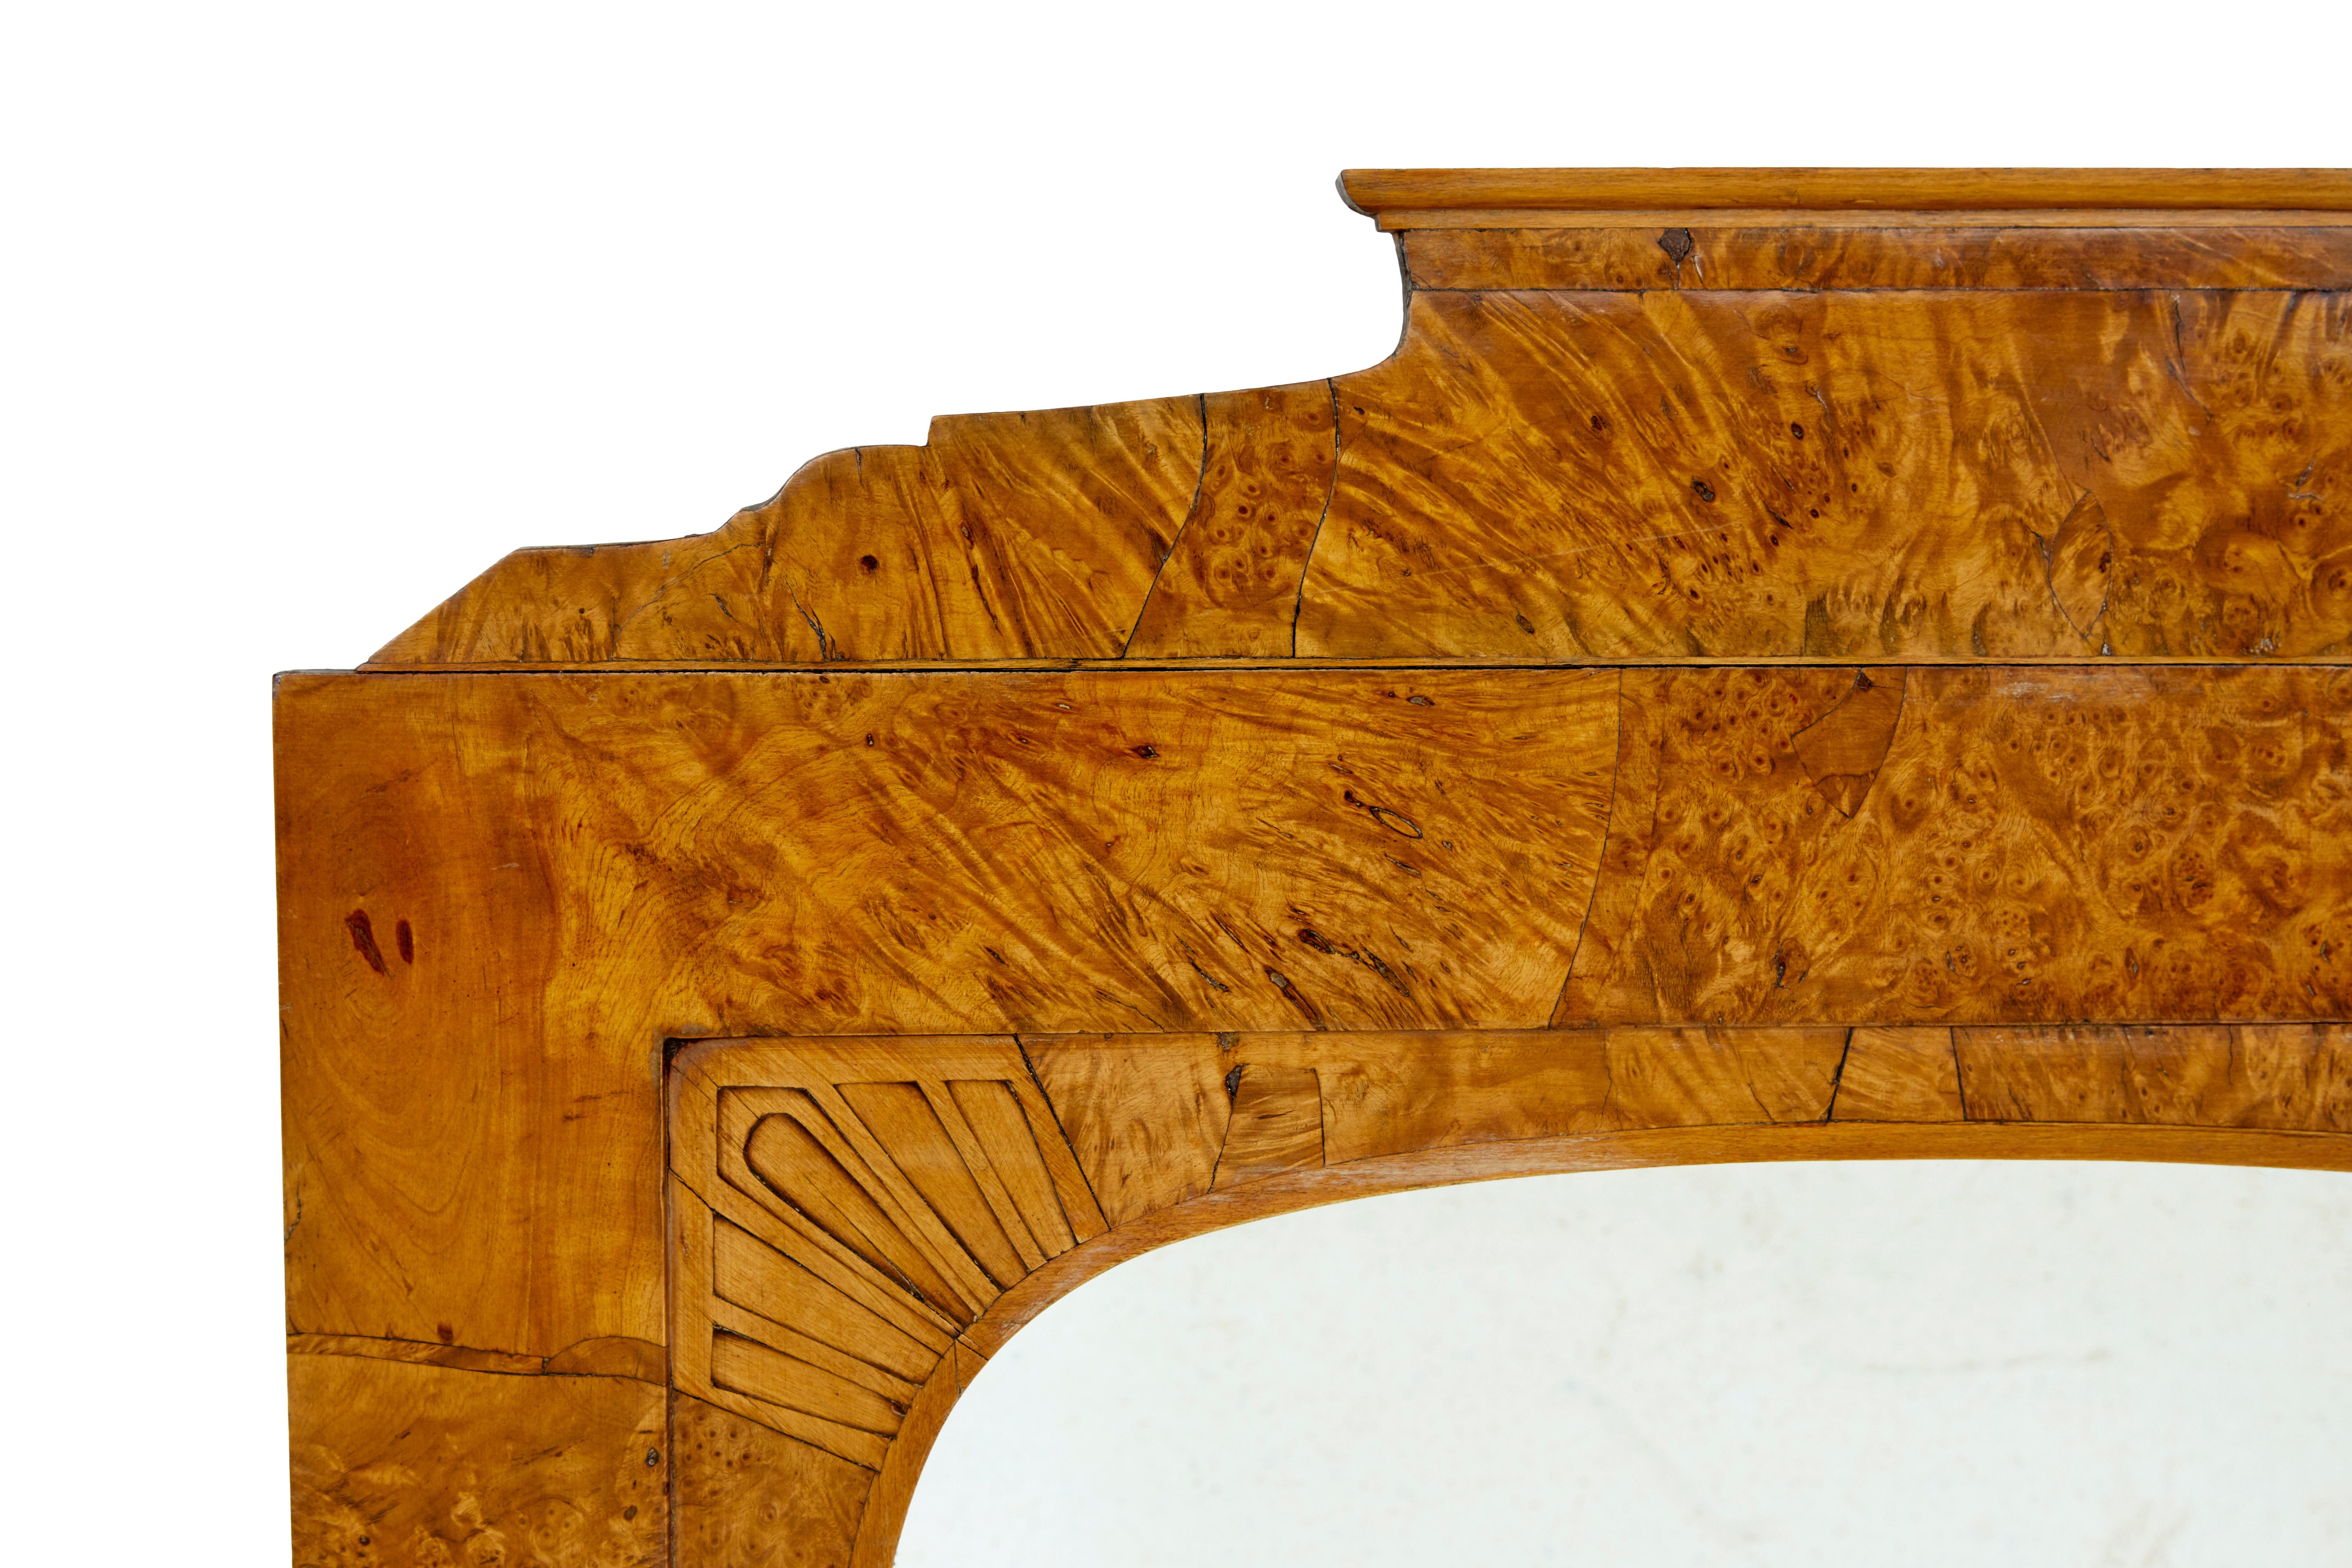 19th century Biedermeier root birch mantle mirror circa 1830.

Made with quality burr birch. Shaped architectural top, inlaid fans to the inner edge. Ideal size for multi rooms such as bedrooms and cloak rooms.

Good color and patina.

Minor surface